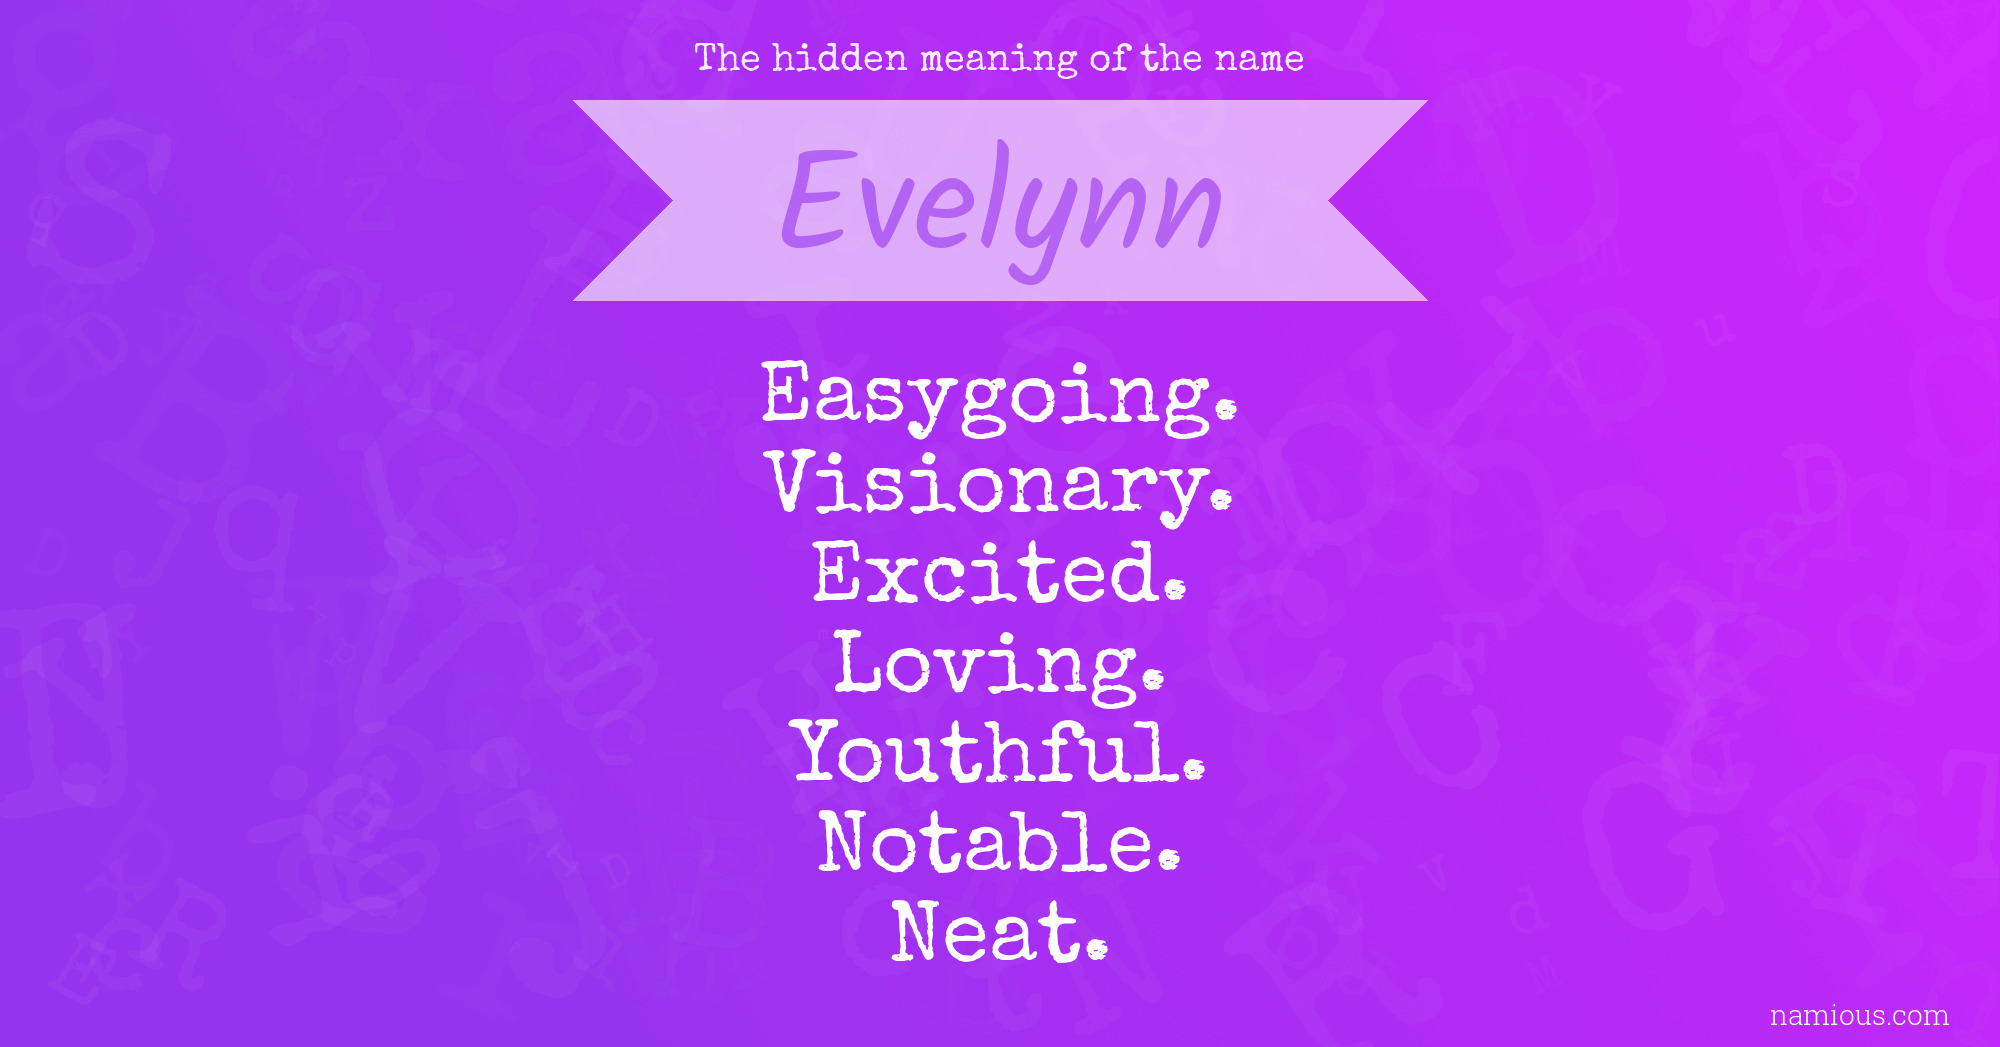 The hidden meaning of the name Evelynn